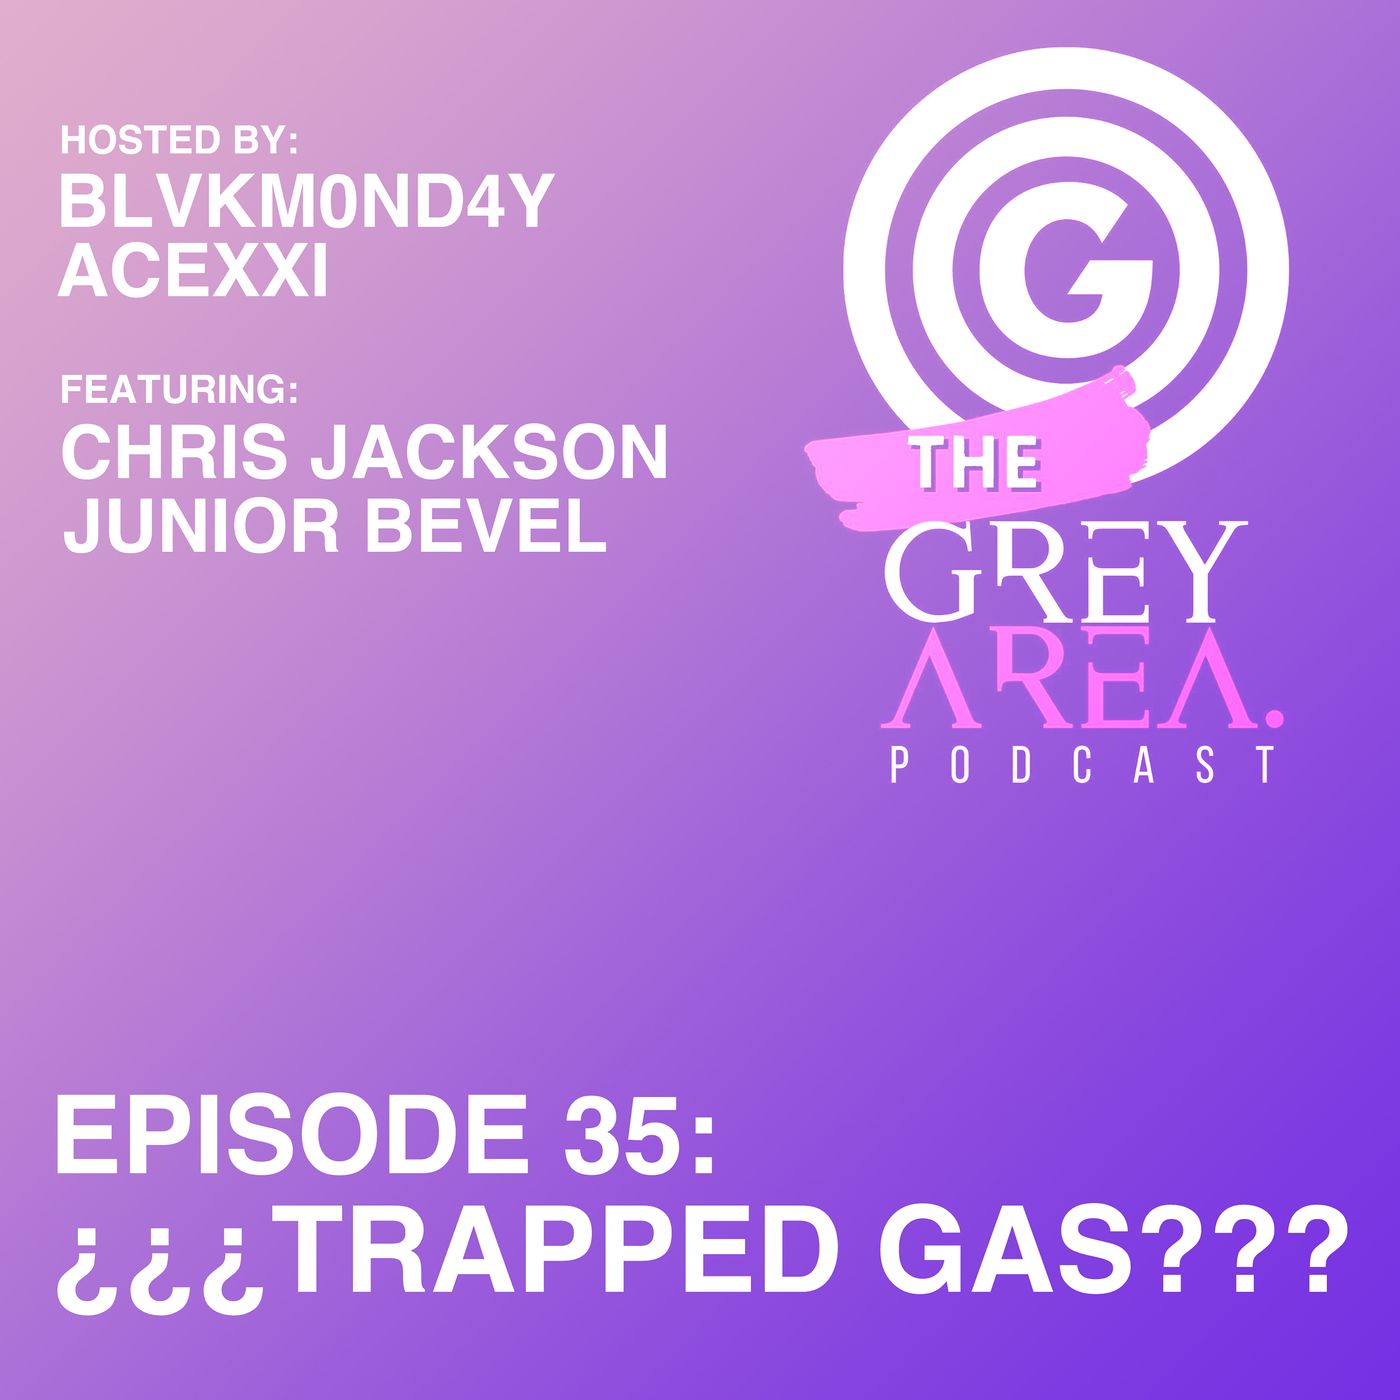 GreyArea PodCast Episode 35: "¿¿¿Trapp3d Gas???"